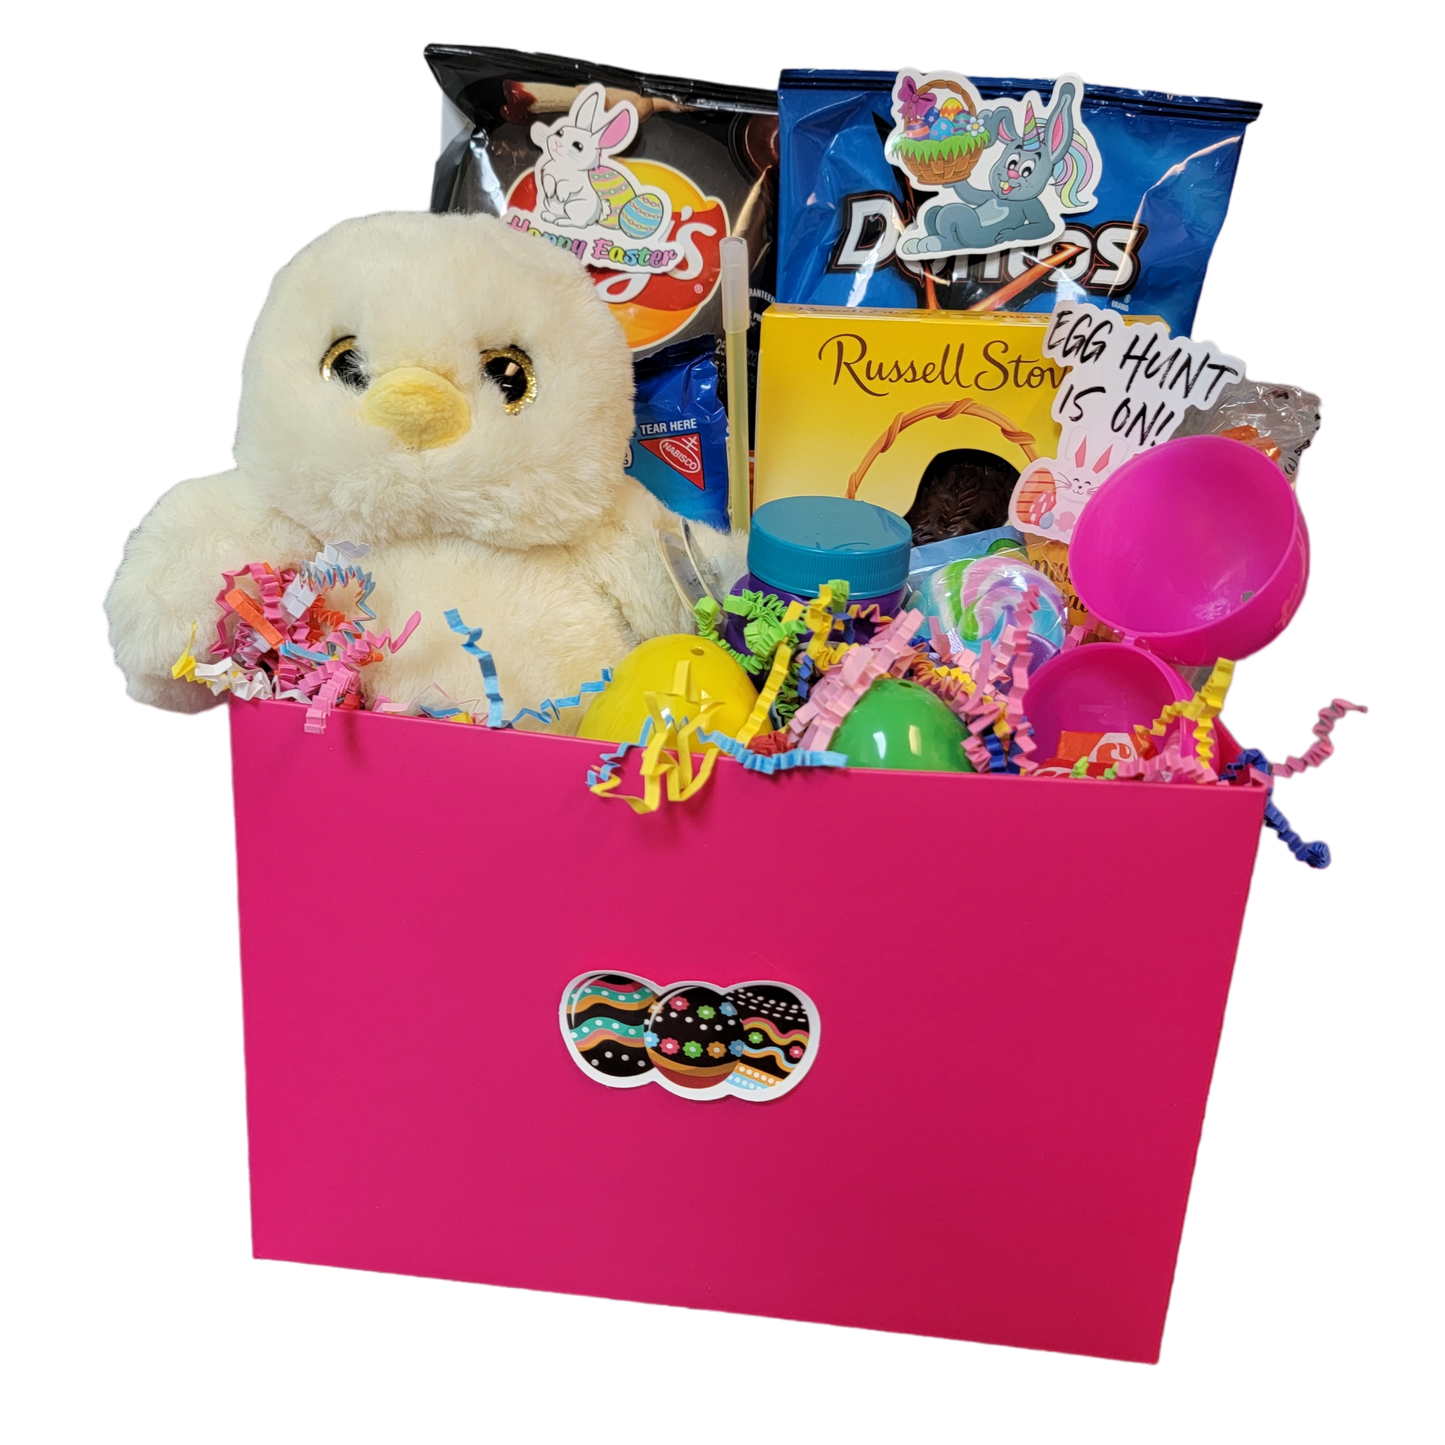 Lil' Chick Easter Gift Box